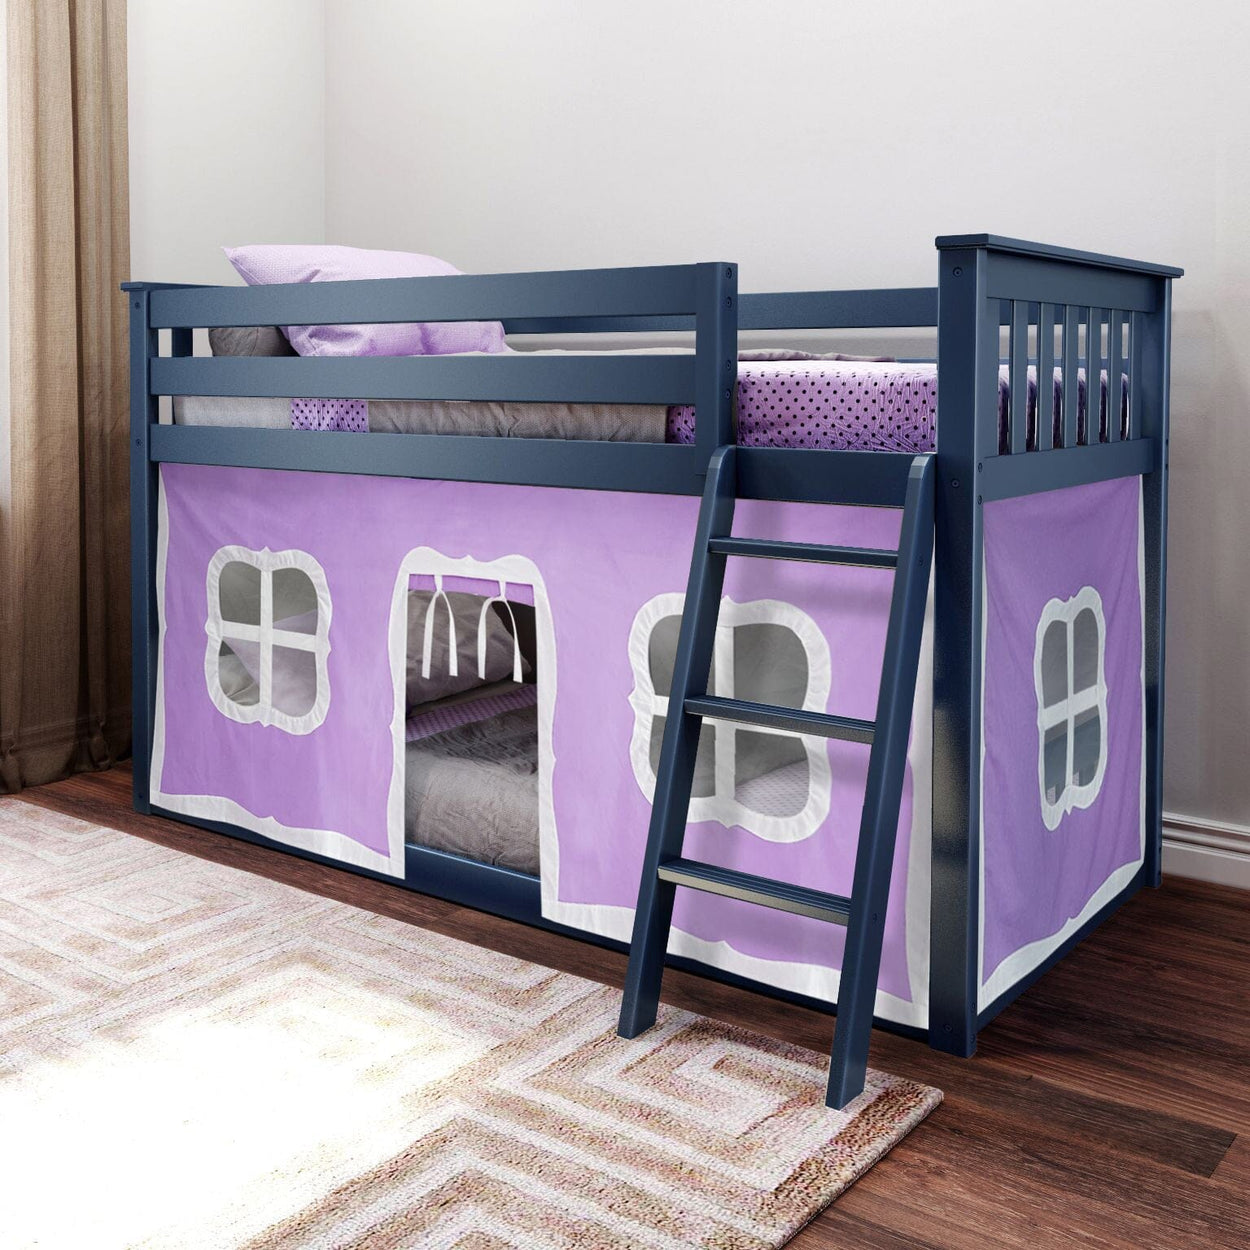 180214131061 : Bunk Beds Twin-Size Low Bunk Bed With Curtain, Blue + Purple Curtain